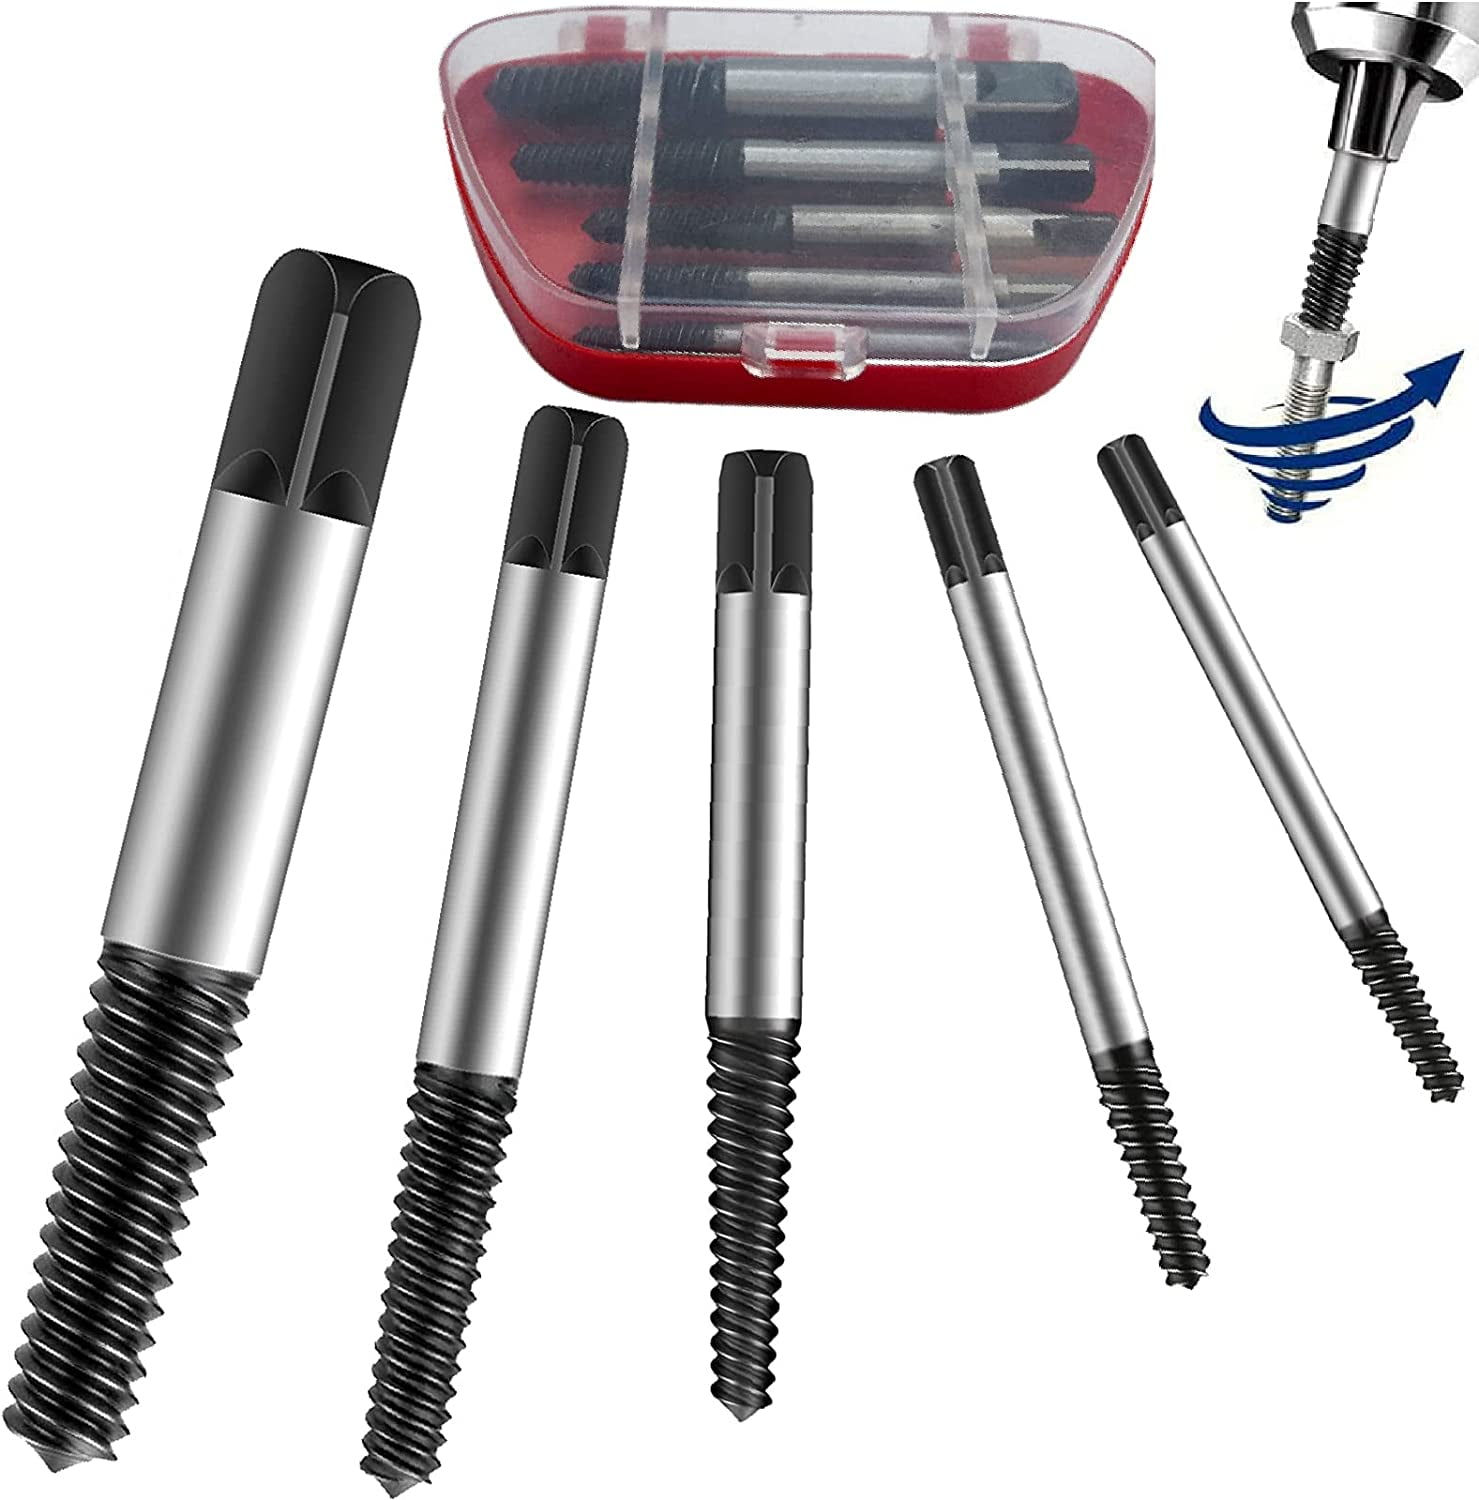 QWORK Screw Extractor Easy Out Damaged Bolt Extractor Kit Stripped Broken Screw Remover for M4-M18 (1/8-3/4) WD1802